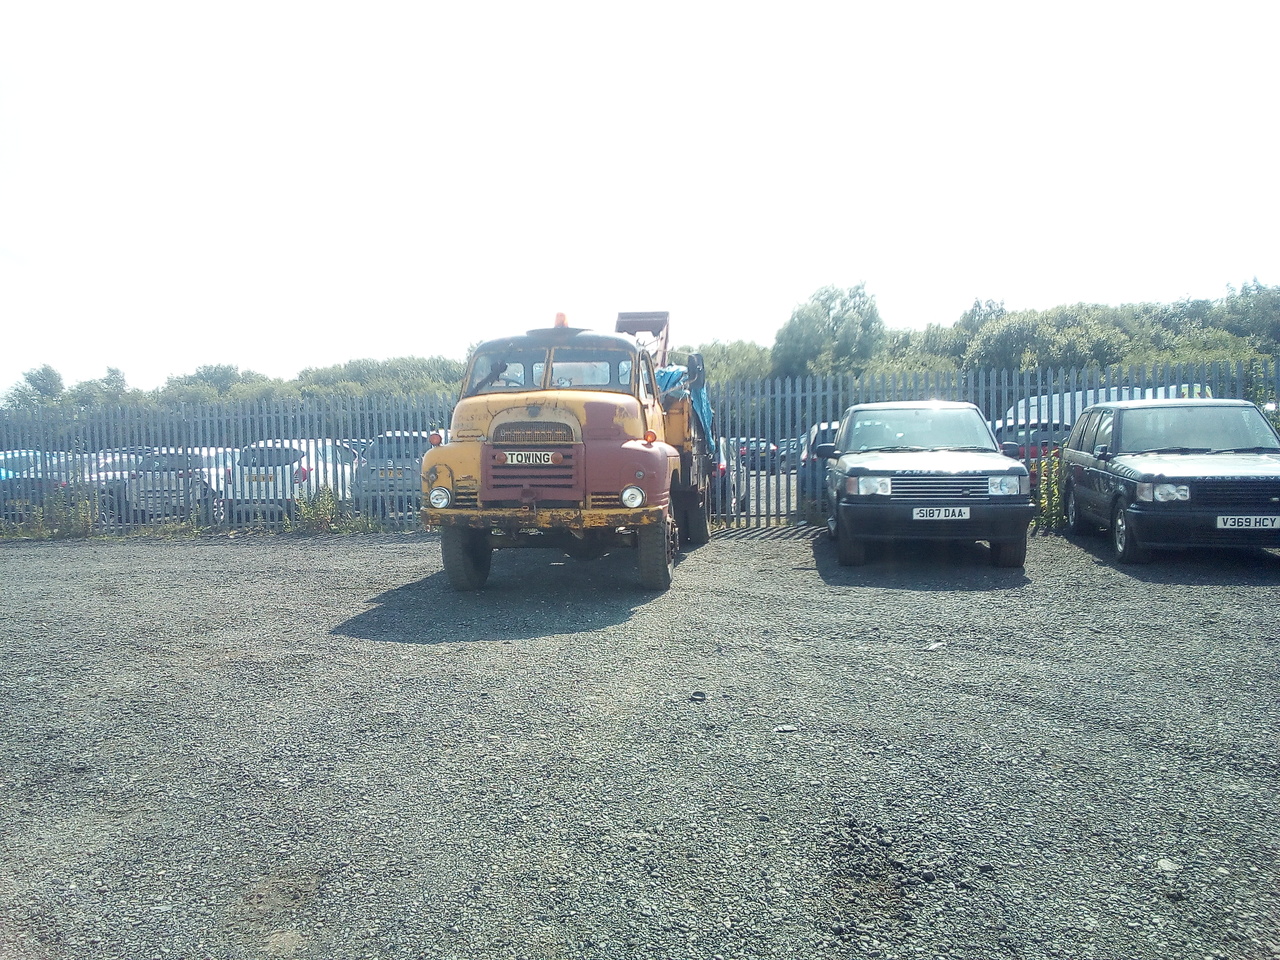 "Bedford parked up against a fence, sat alongside a pair of Range Rovers"